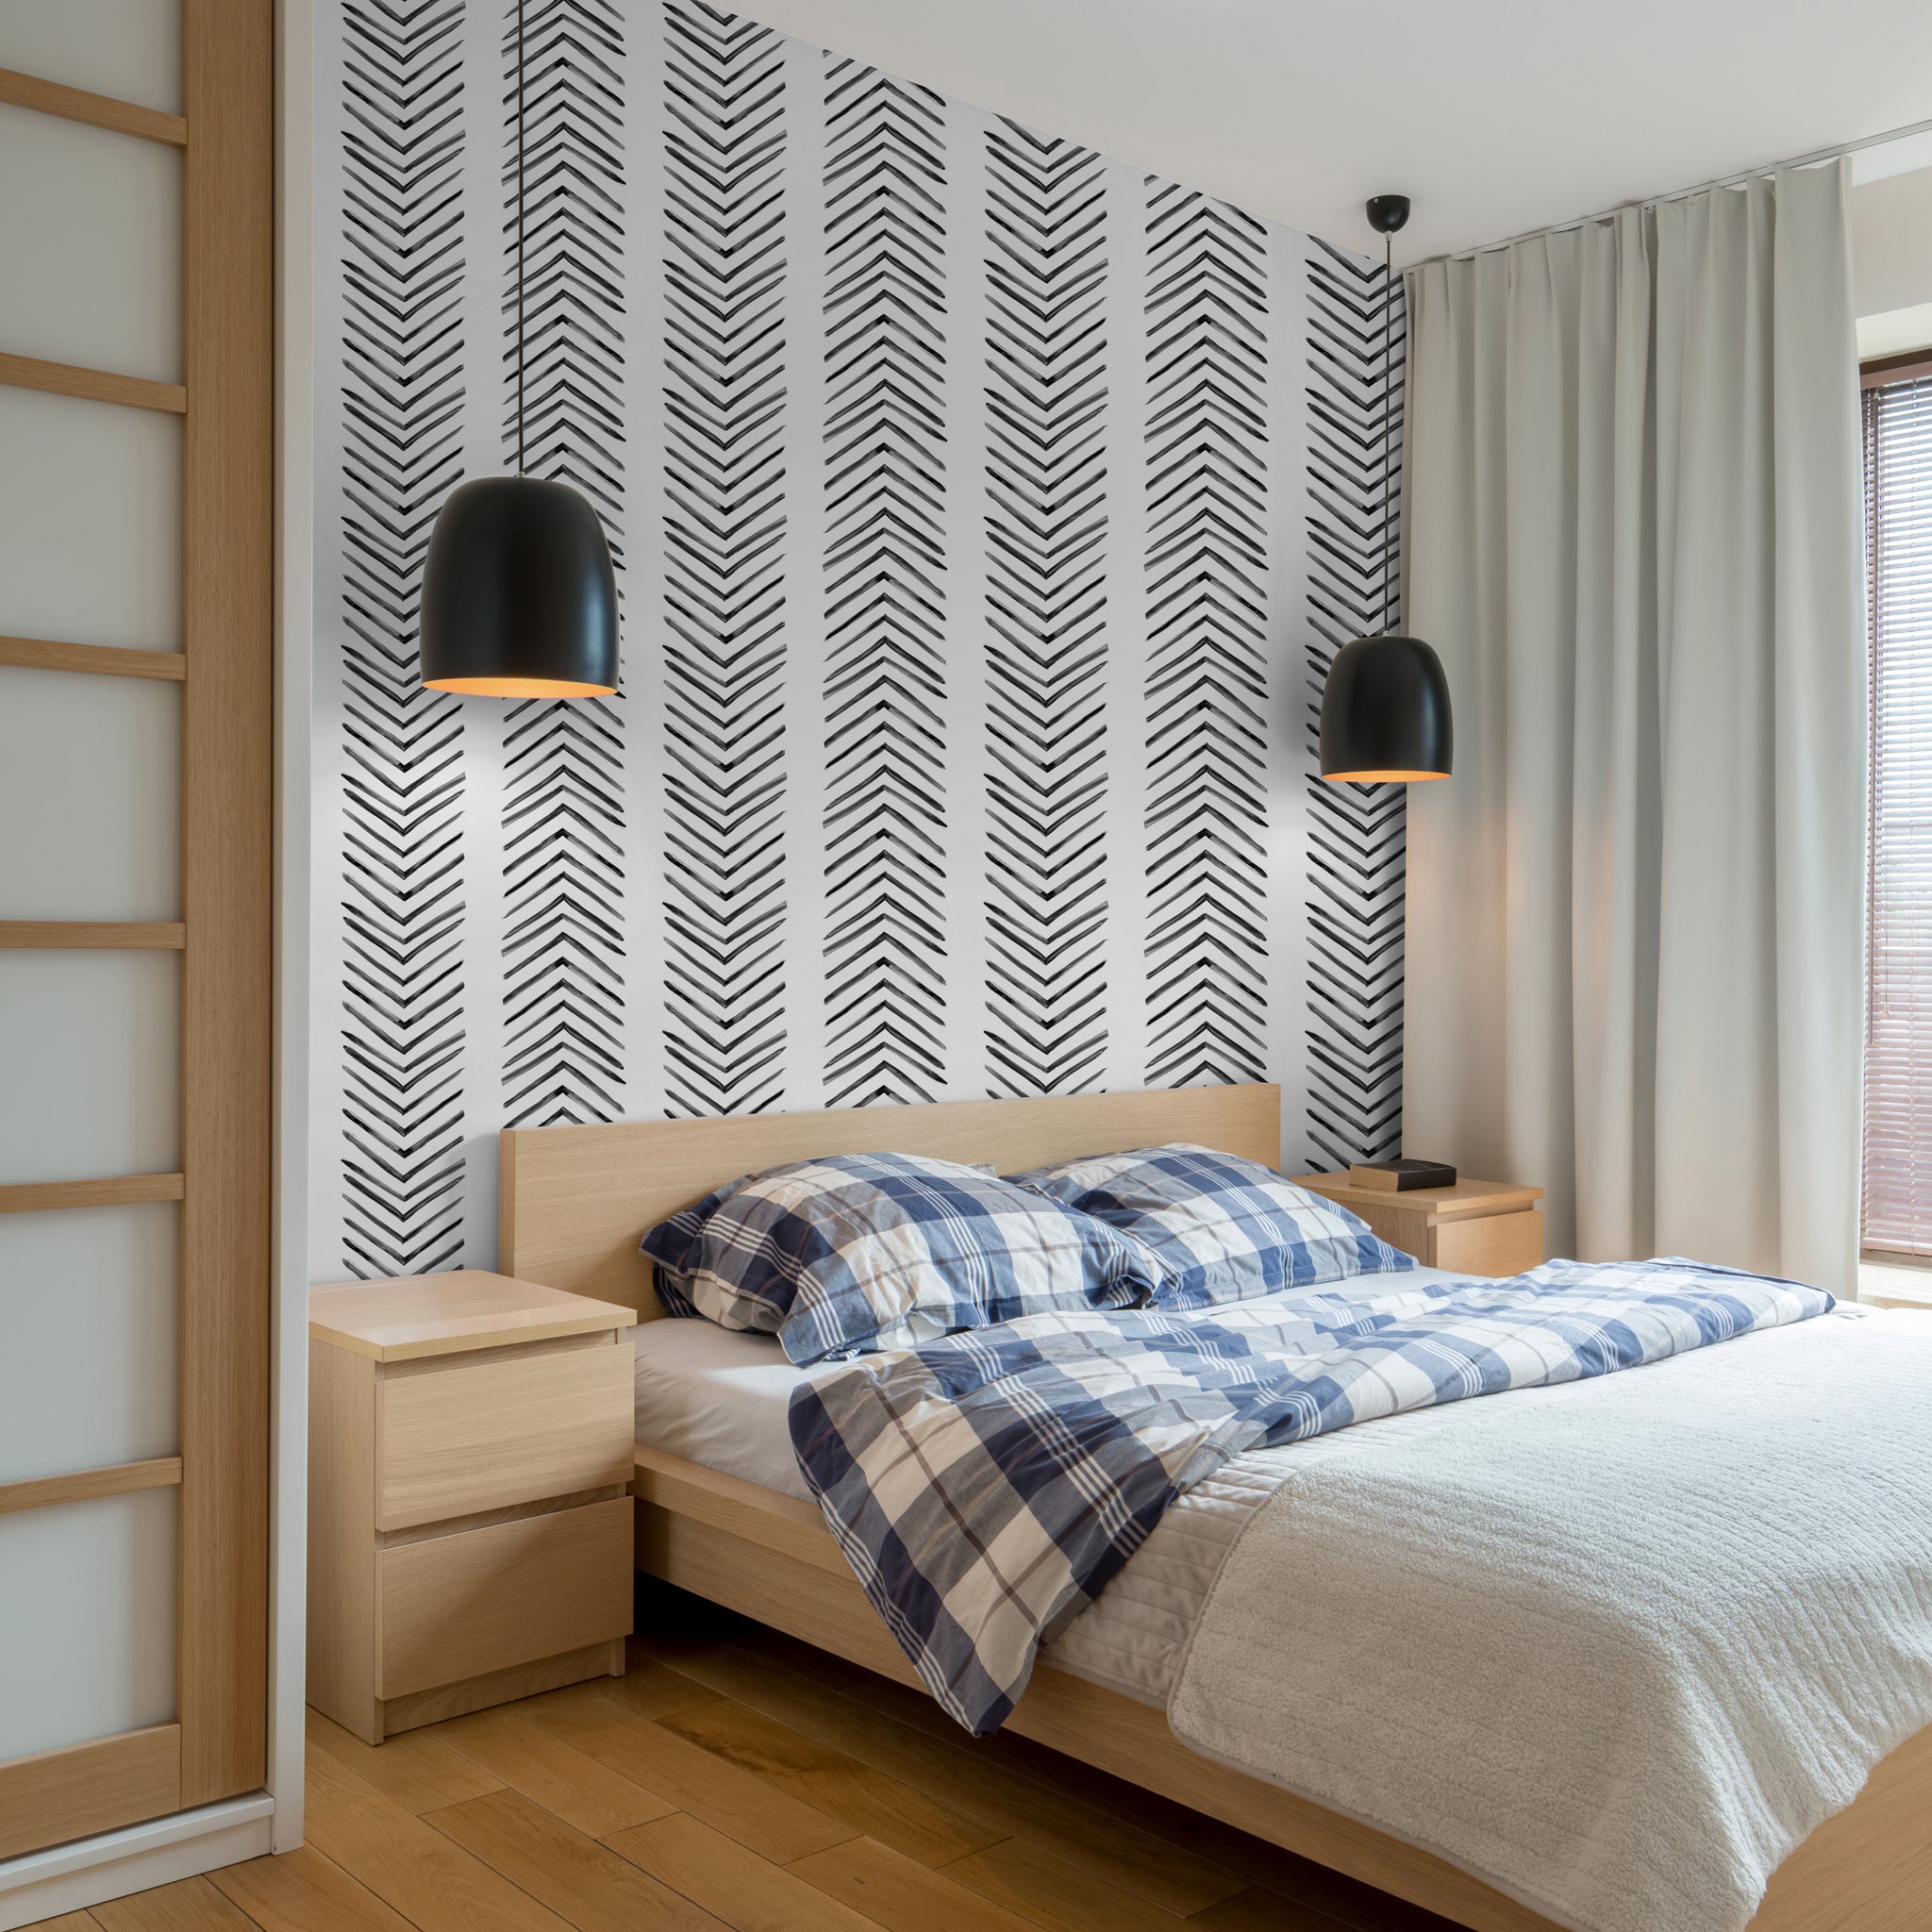 "Ar-row Wallpaper by Wall Blush accenting a modern bedroom decor with stylish design focus."